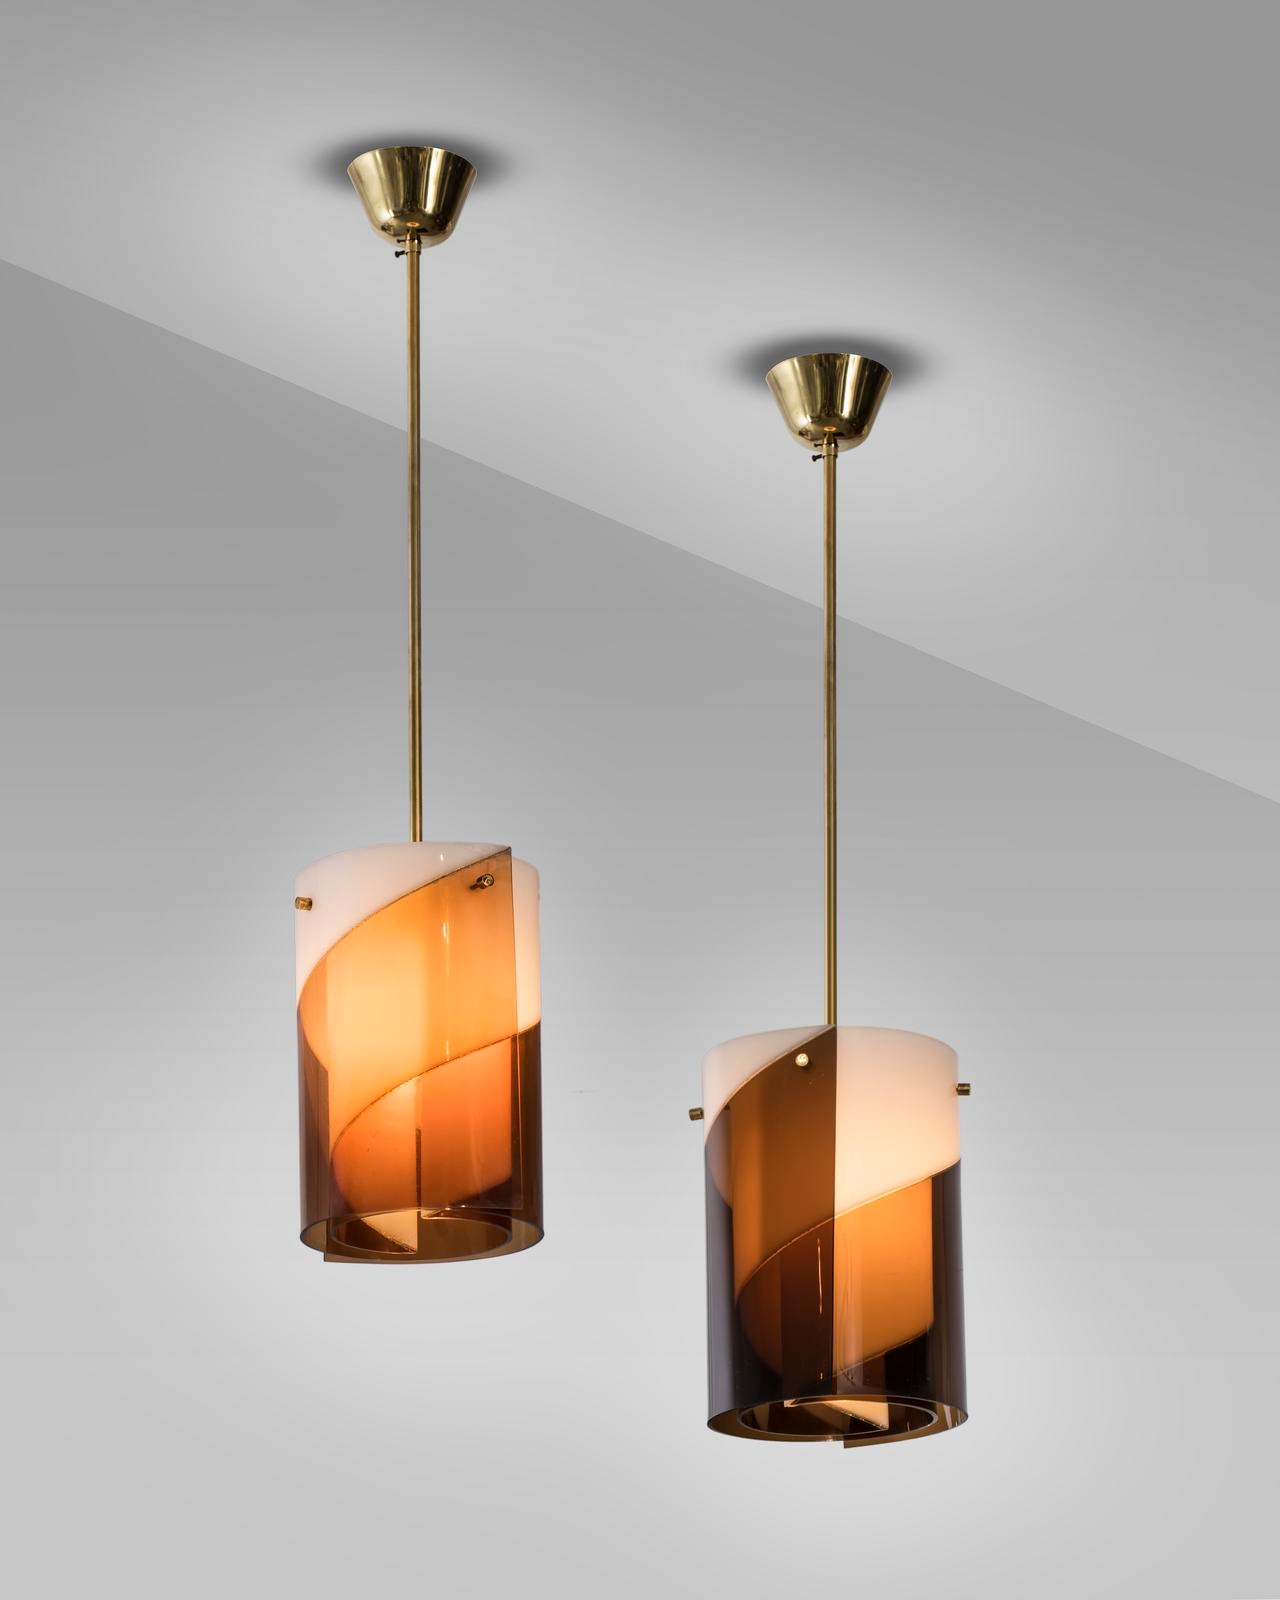 Artwork by Yki Nummi, Two Works: A set of "64-463" ceiling lights, Made of Acrylic, brass